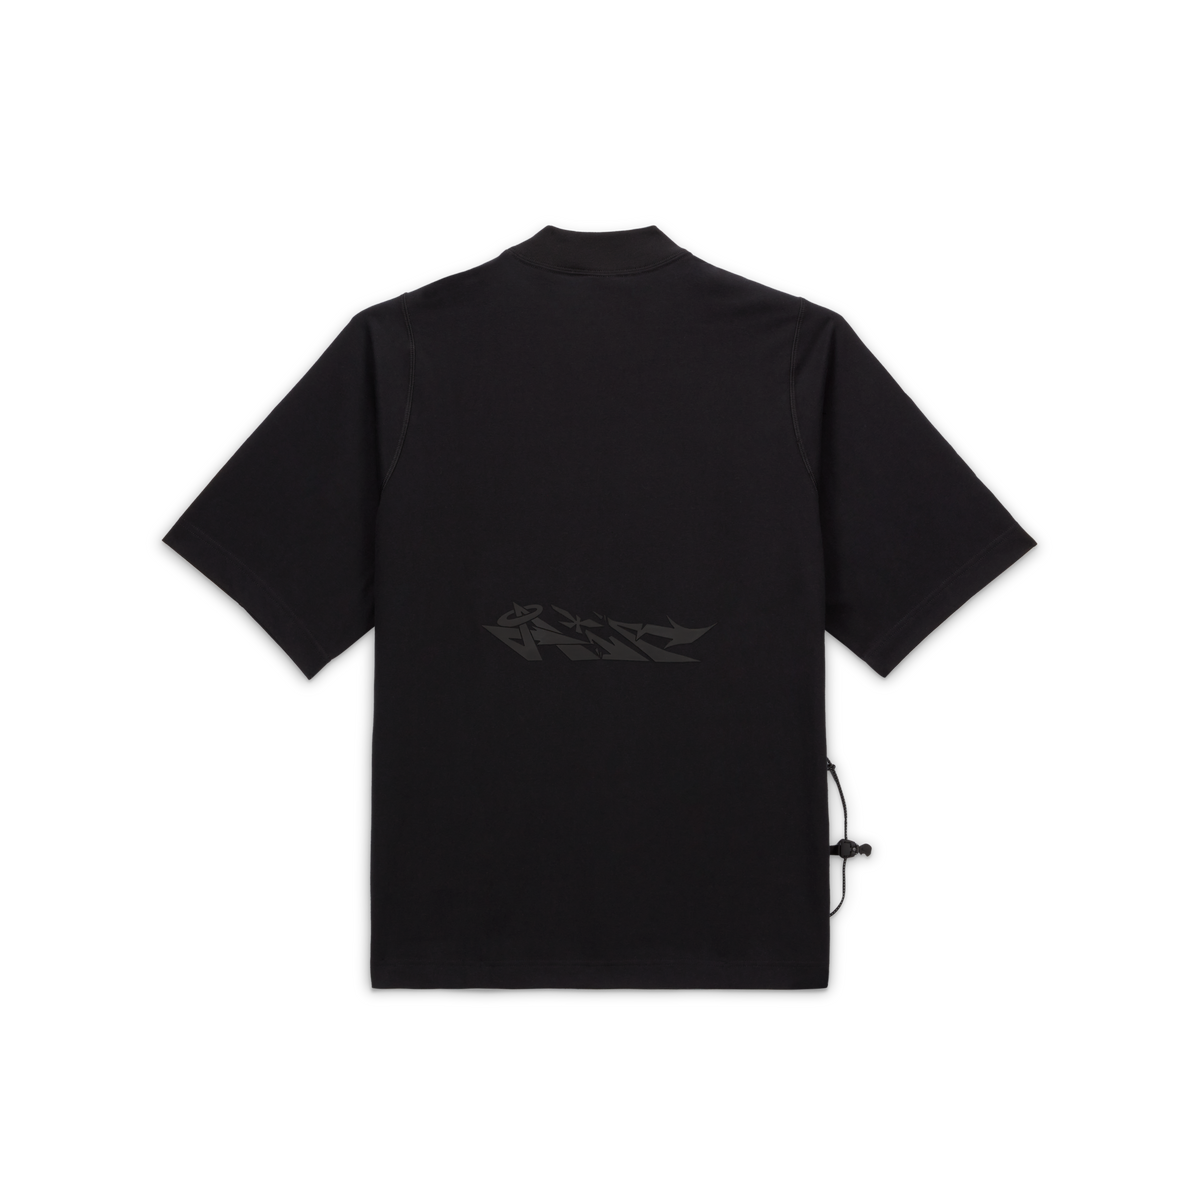 Nike x Off-White™ Short-Sleeve Top (Black) – Canary Yellow